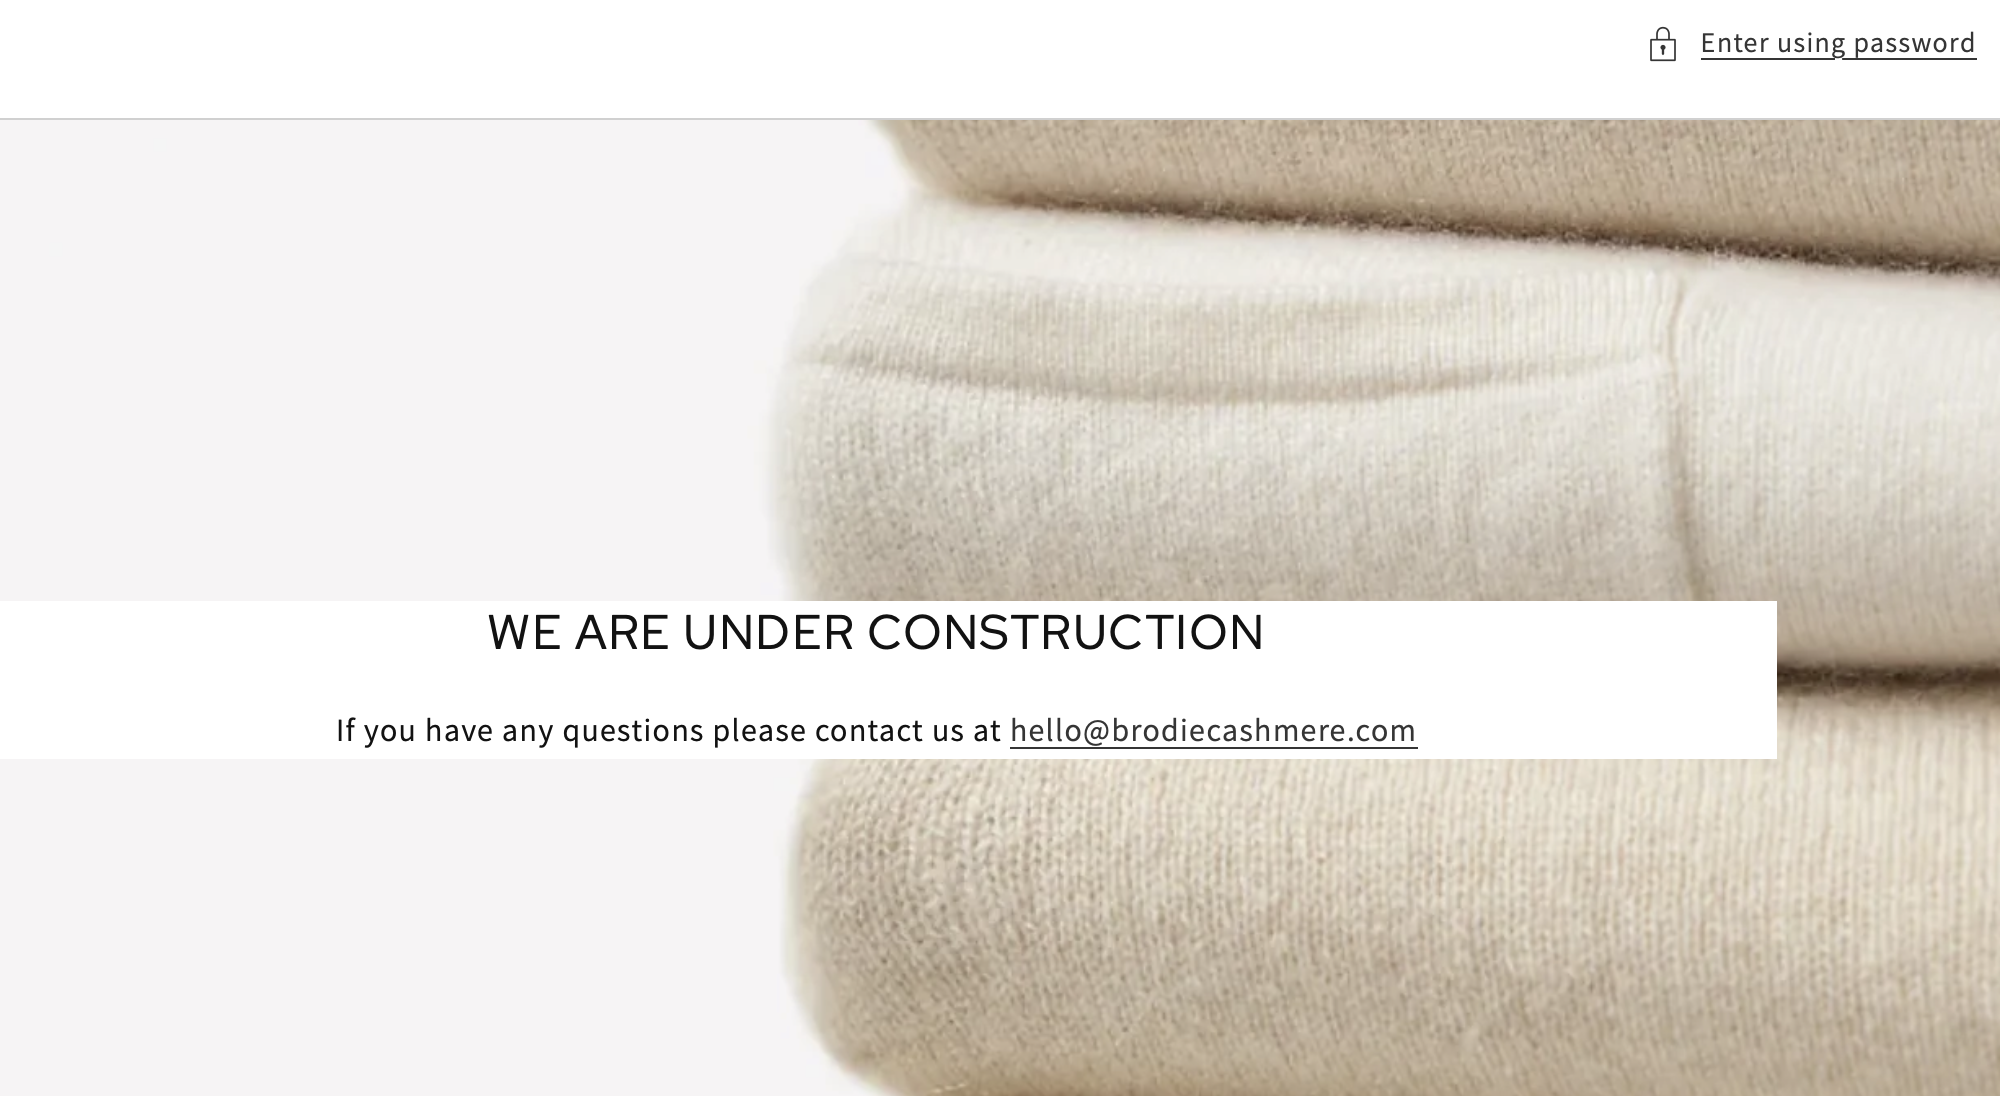 Cashmere business bought of out administration